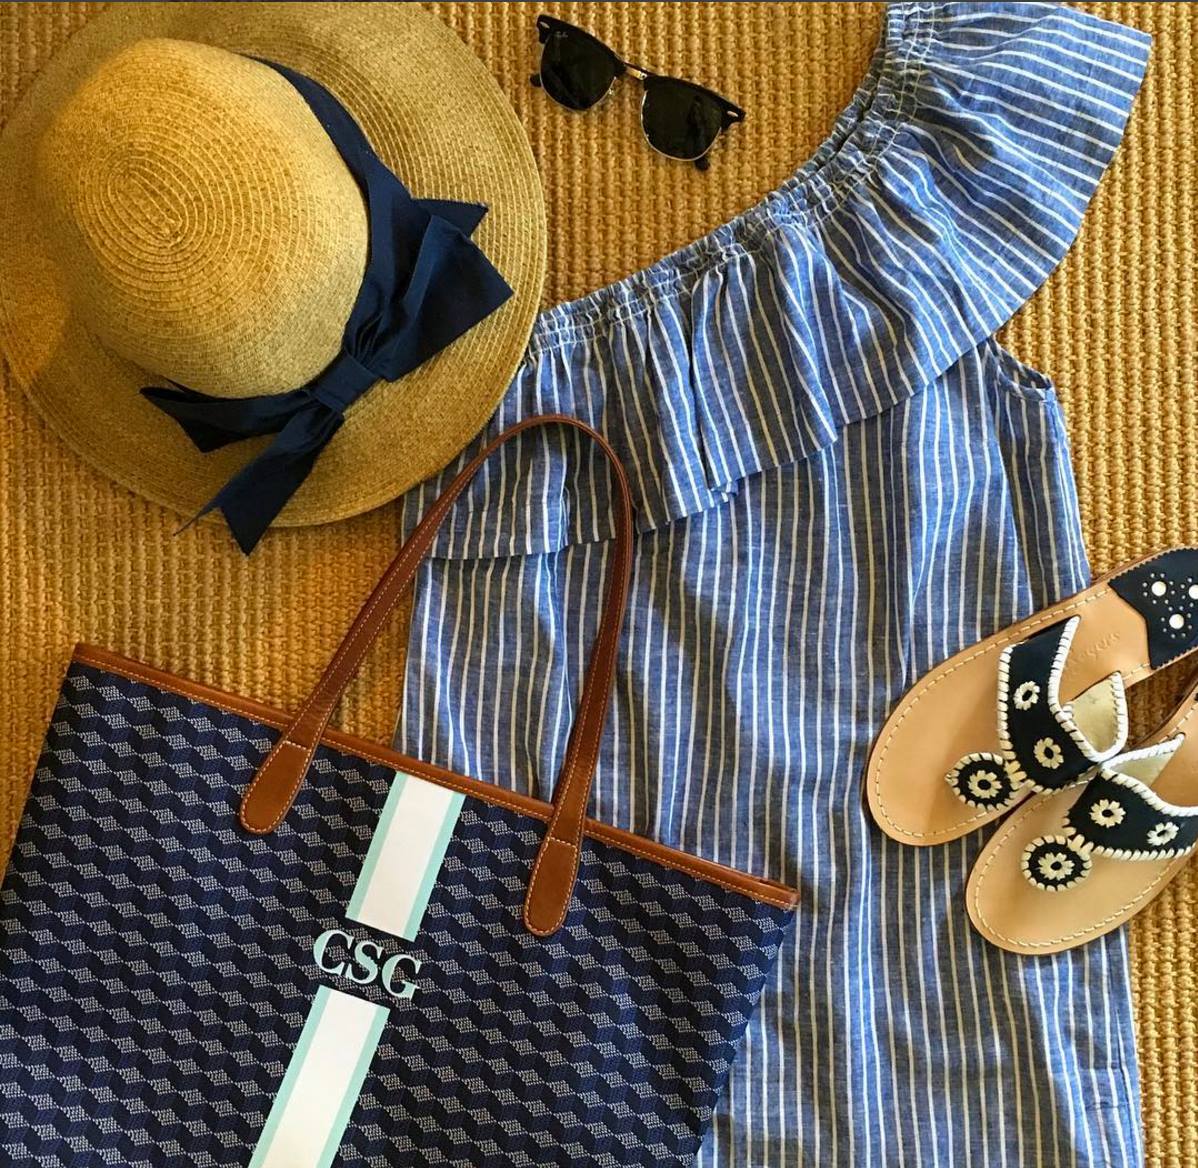 Beach-ready outfit complemented by a monogram purse